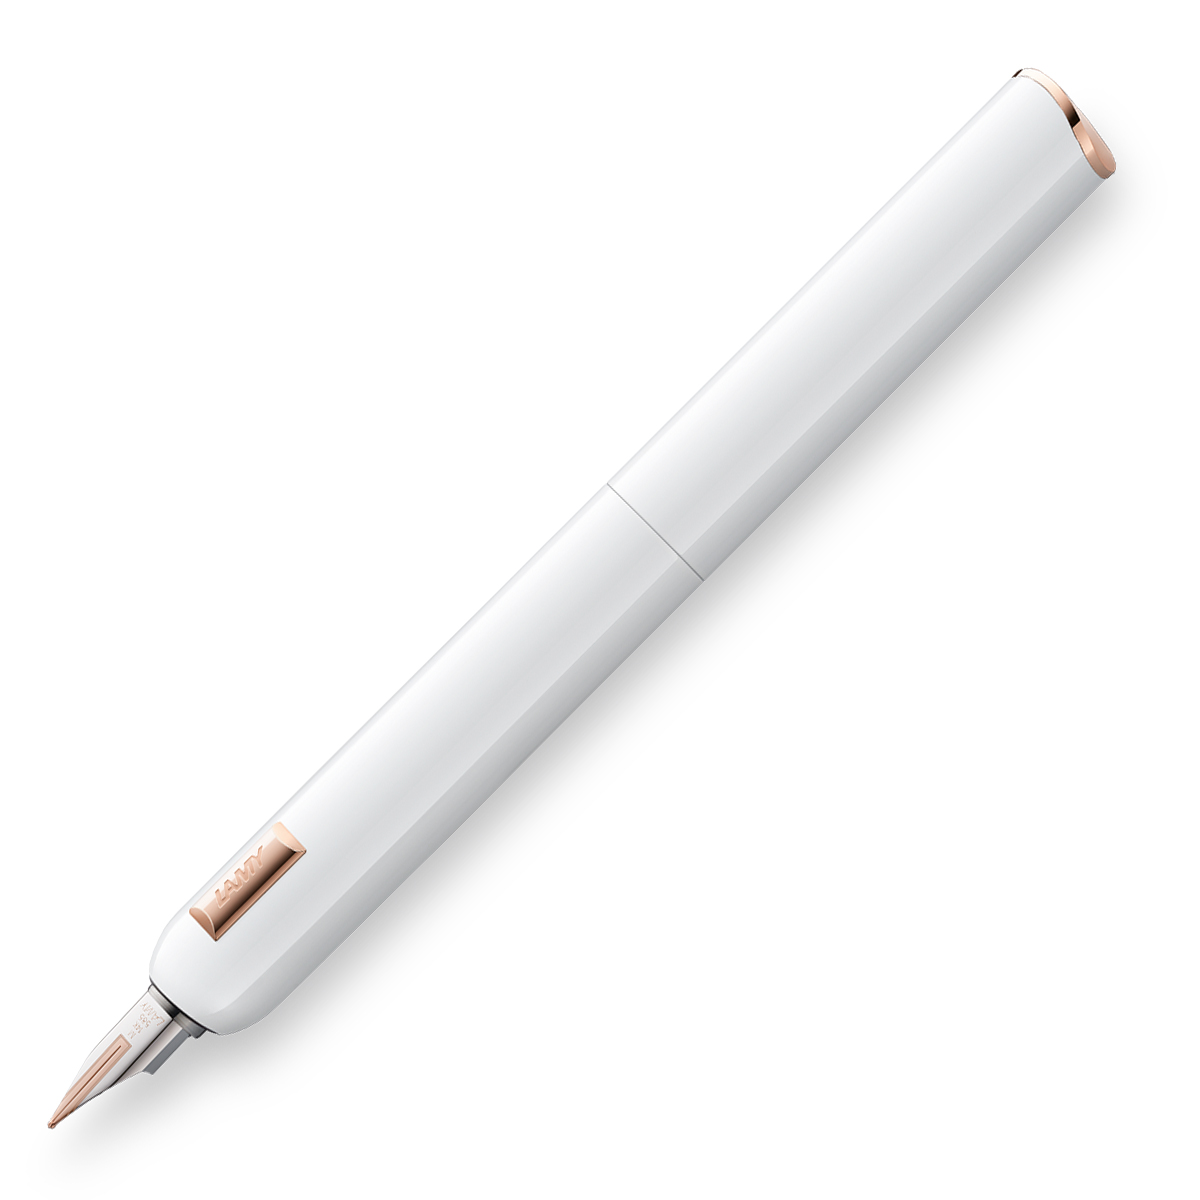 Dialog CC White Fountain pen in the group Pens / Fine Writing / Fountain Pens at Pen Store (126987_r)